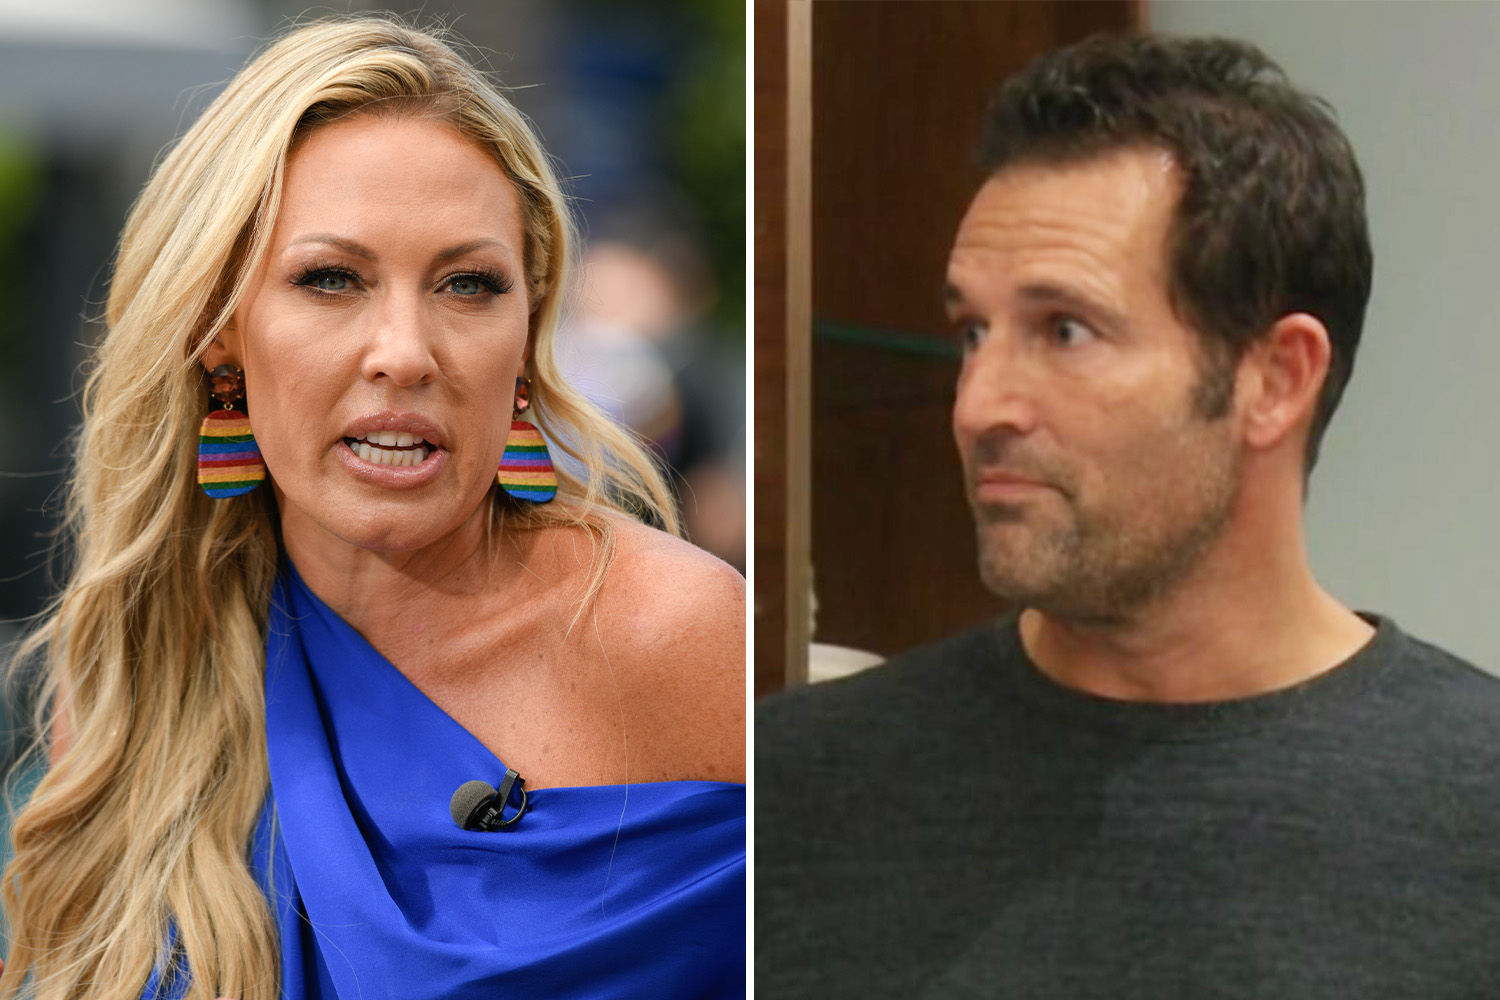 RHOC’s Braunwyn Windham-Burke’s Estranged Husband Demands Joint Custody Of Kids After She Requested Support